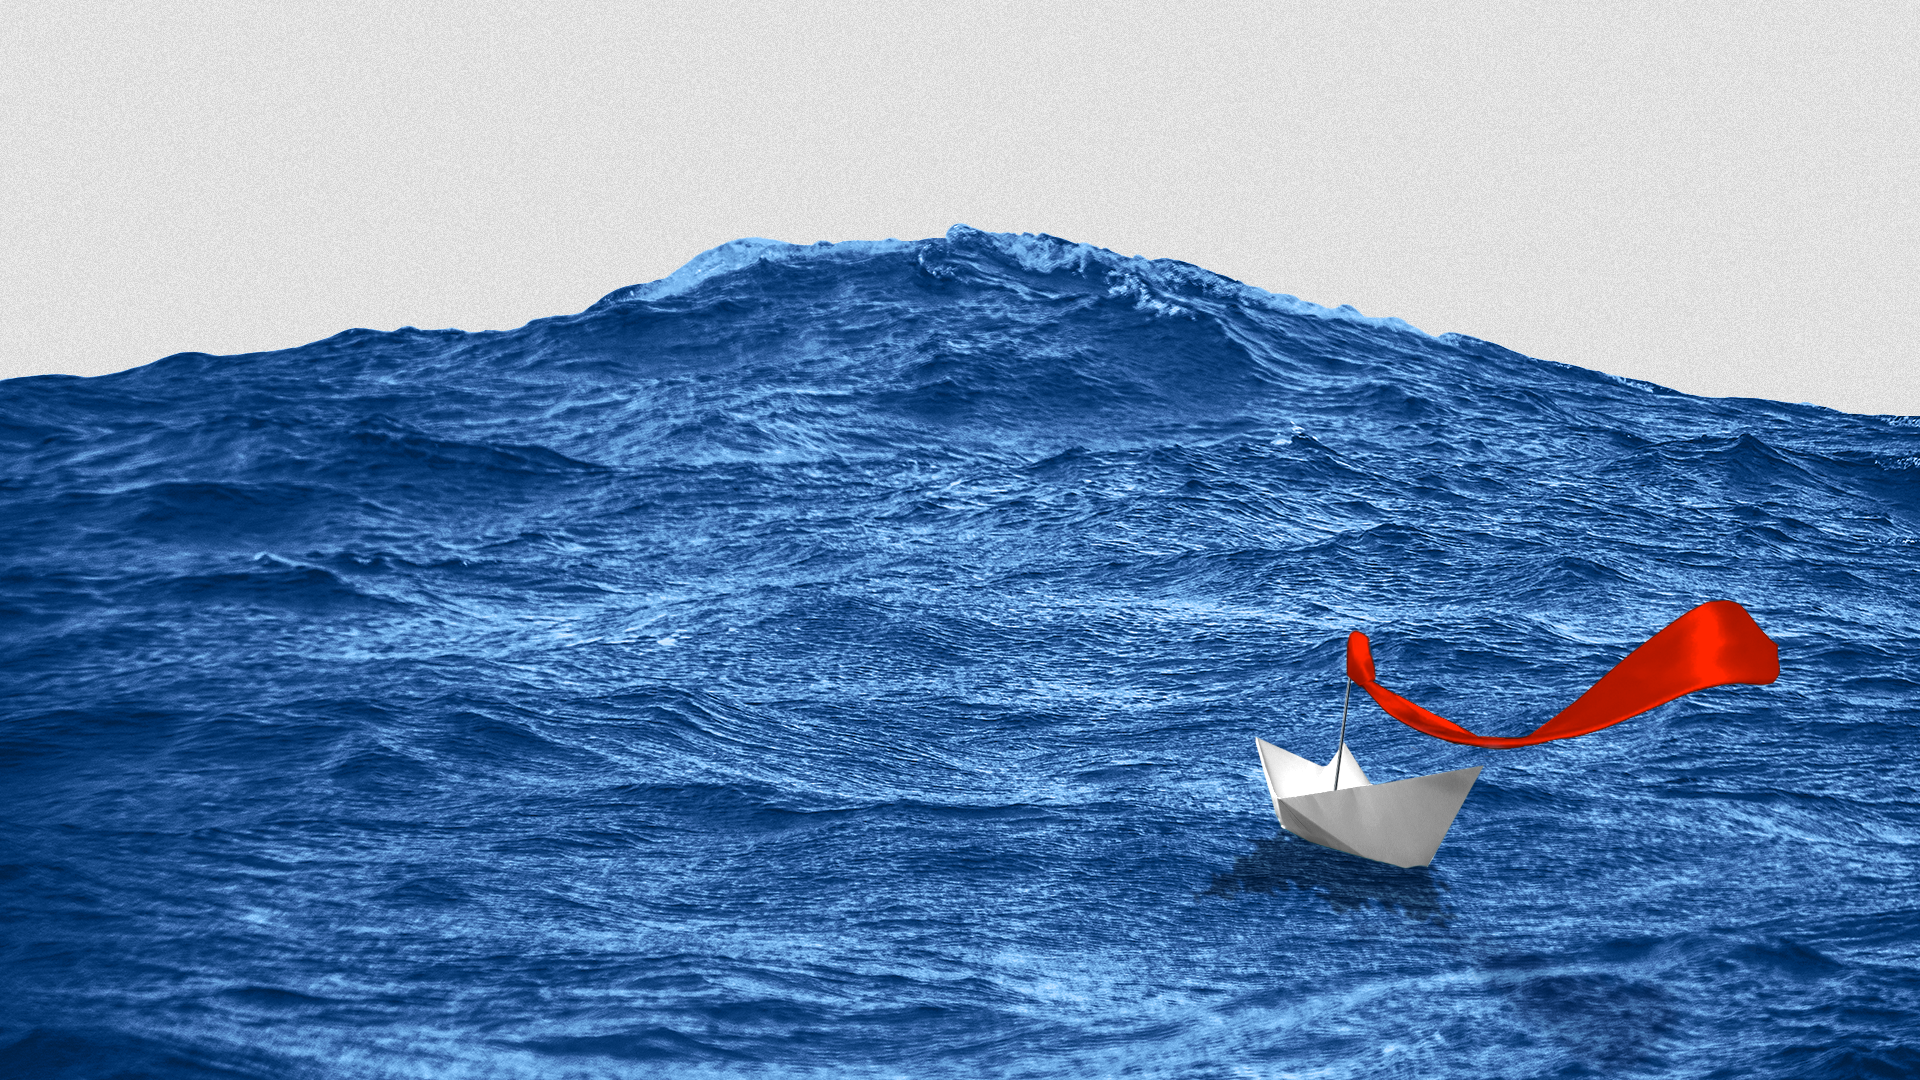 Illustration of a paper boat with a red tie as a flag going up against a giant blue wave